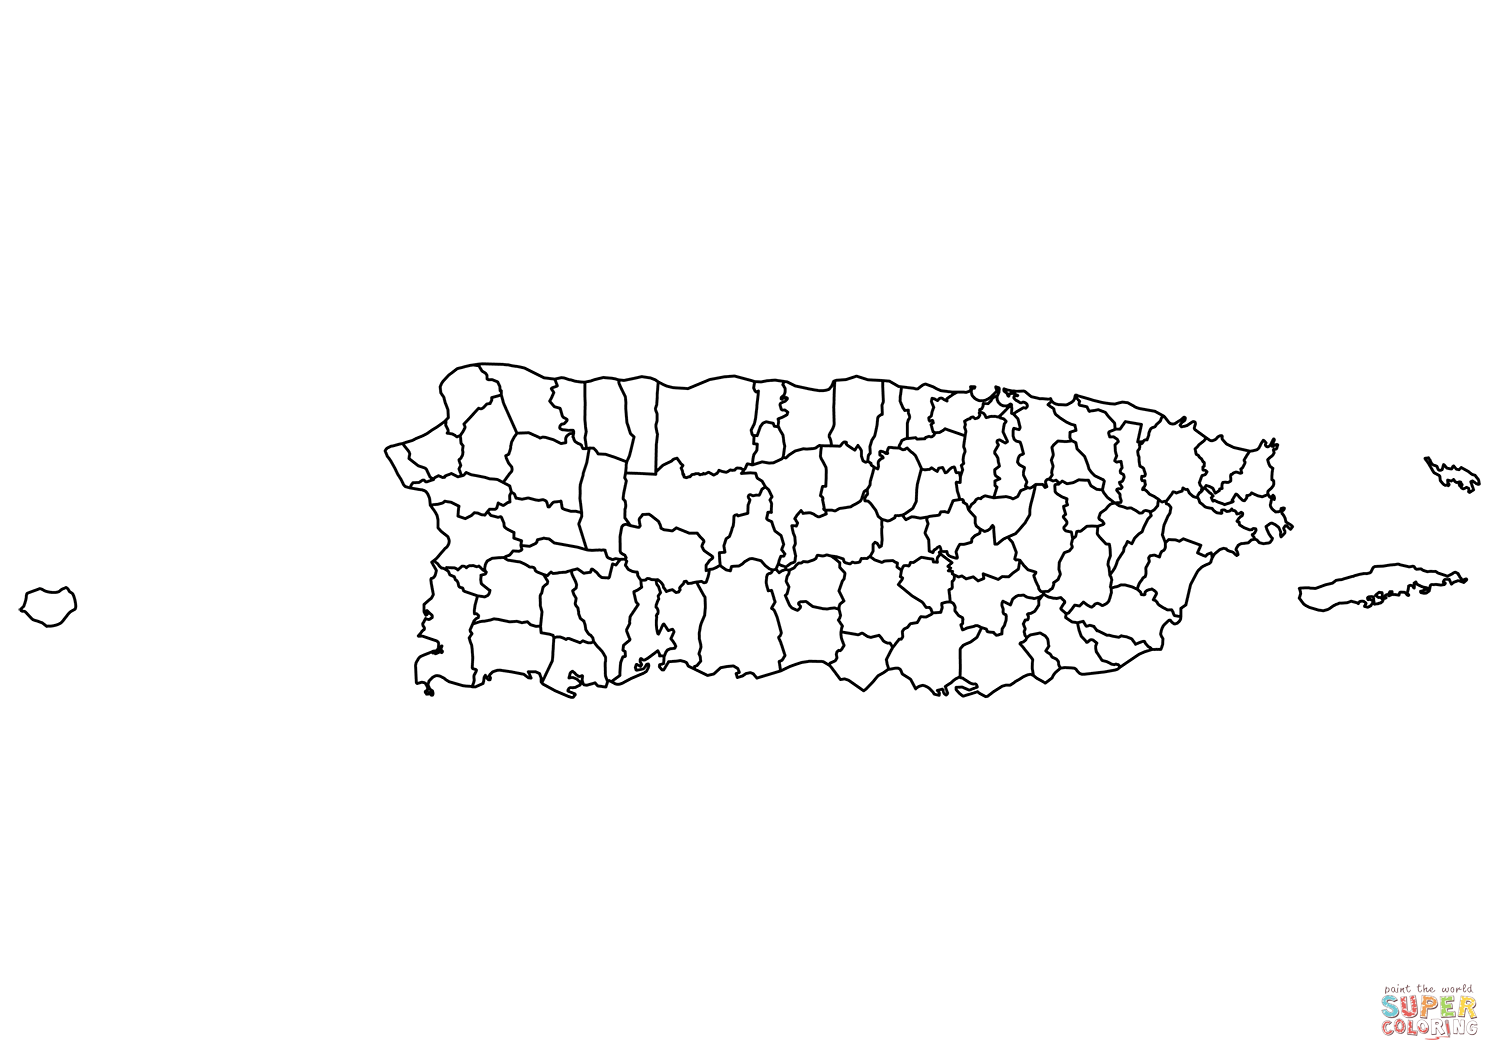 Outline map of puerto rico with counties coloring page free printable coloring pages